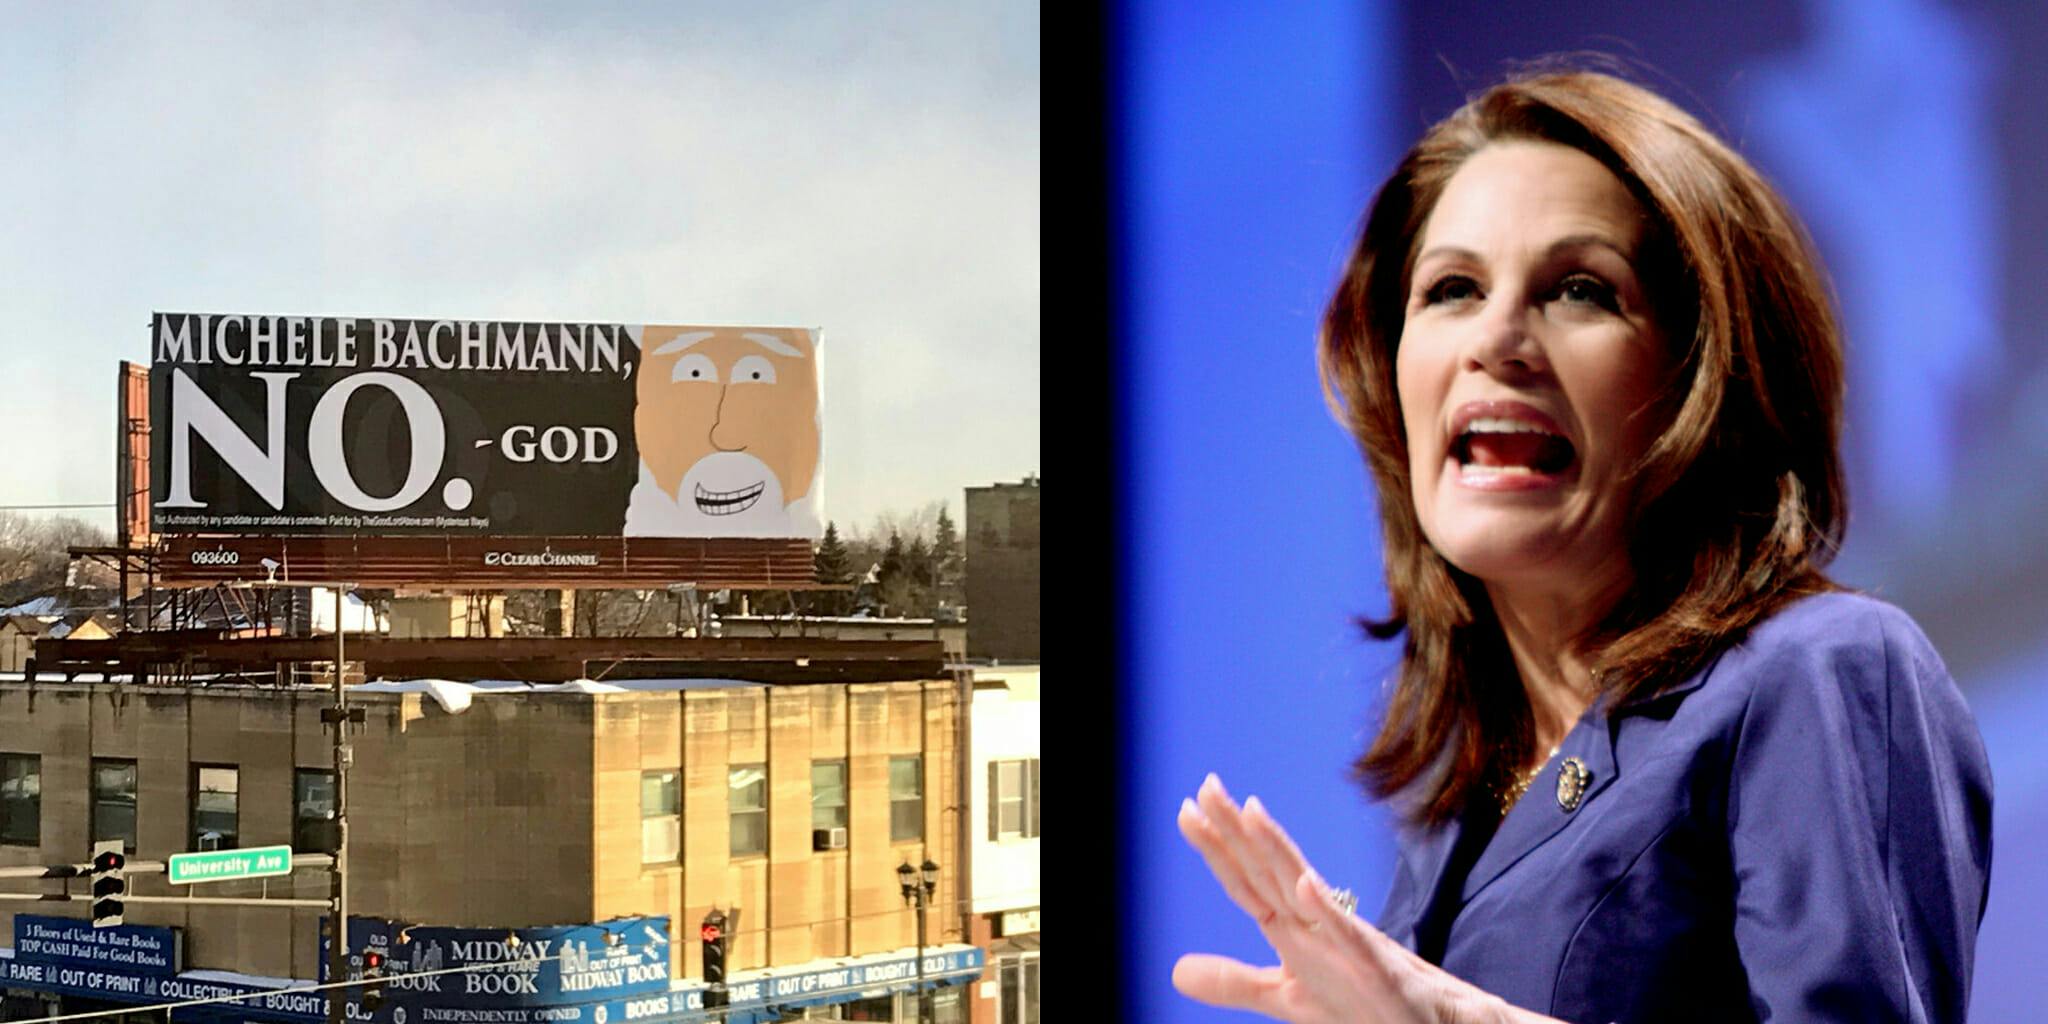 A billboard has popped up in Minnesota depicting 'God' telling former congresswoman Michele Bachmann not to run for Senate later this year.